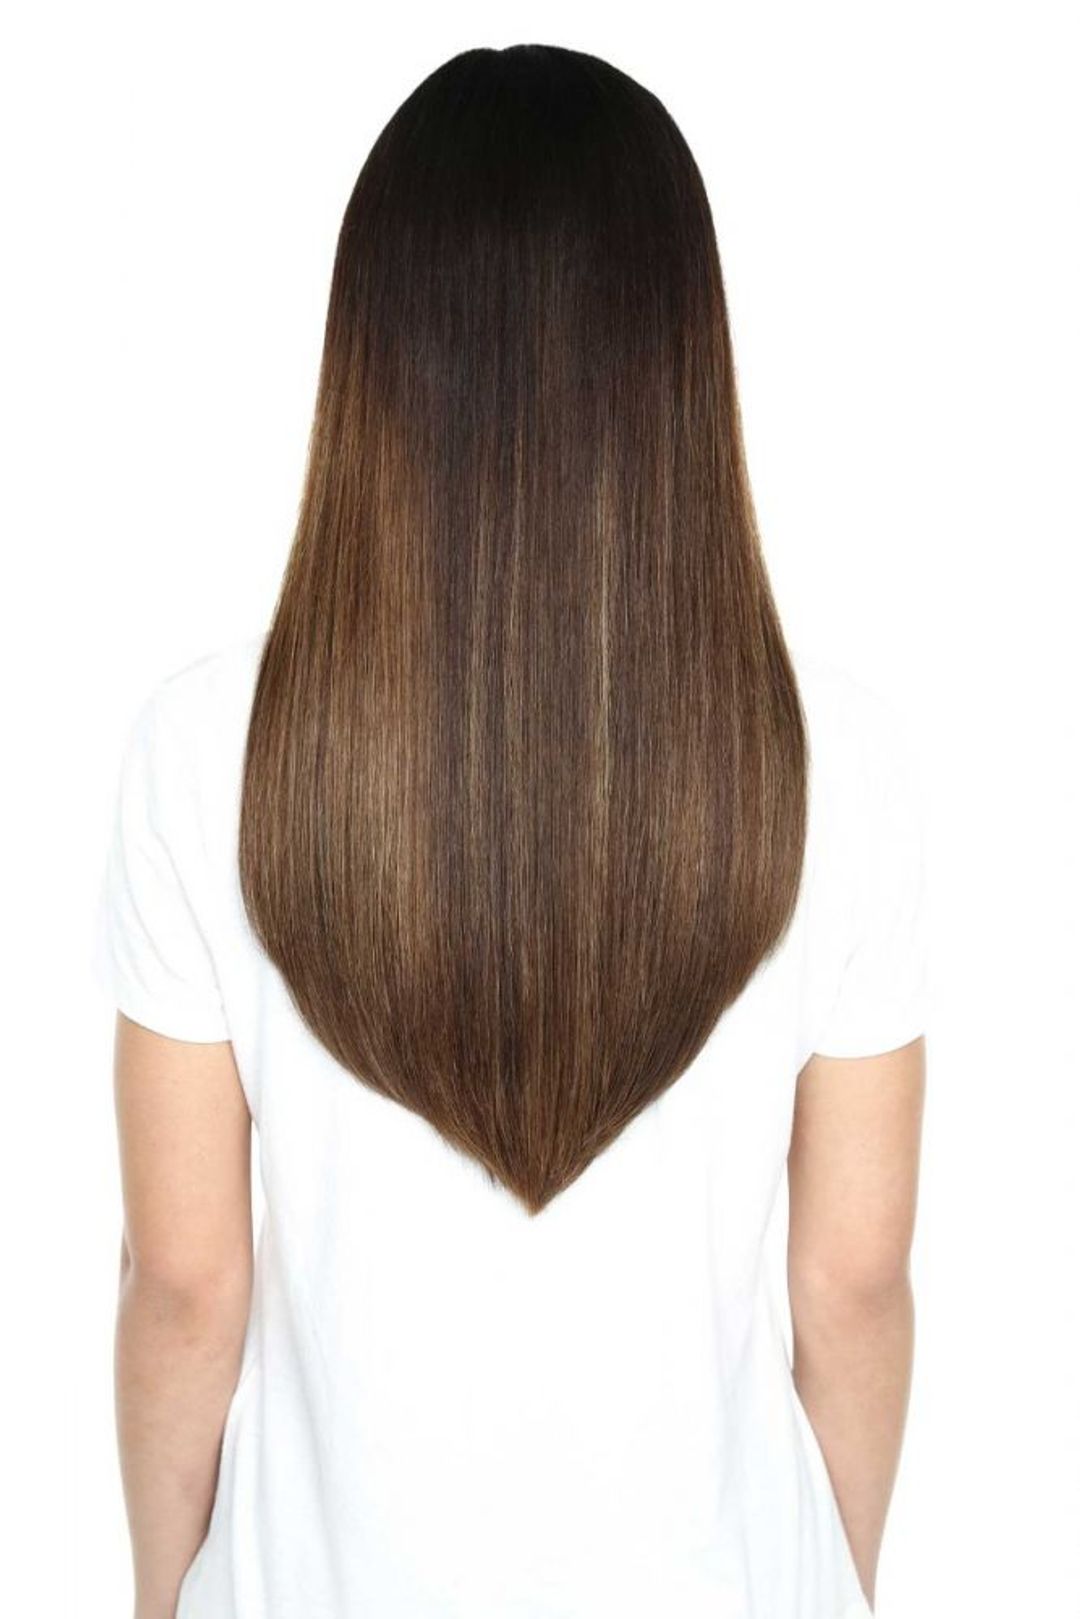 Beauty Works Gold Double Weft Extensions - Natural Black,18"